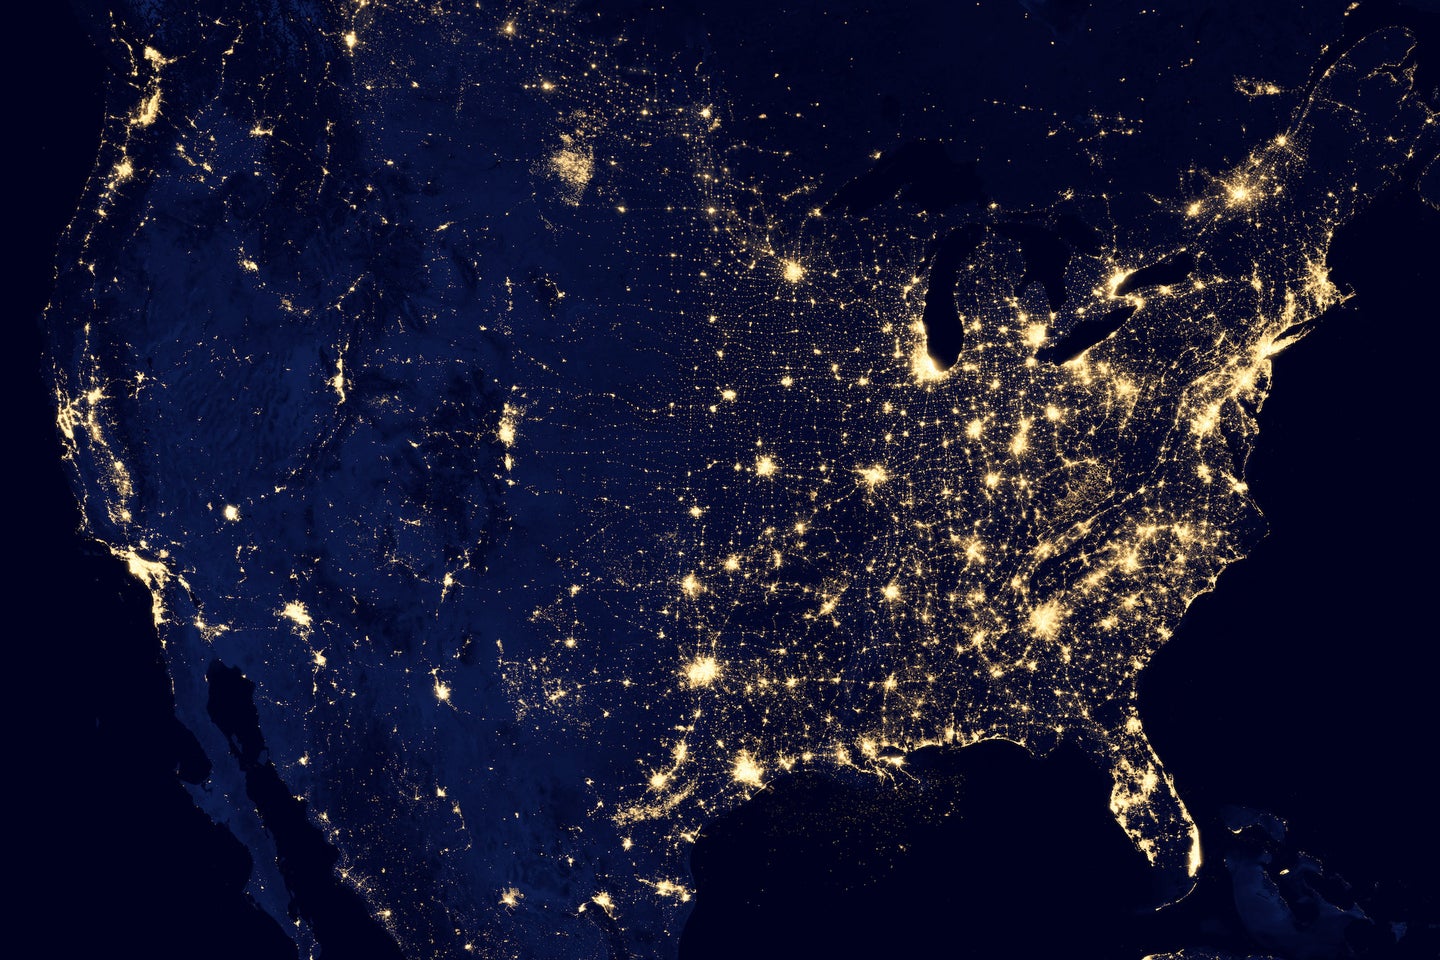 The continental US at night, based on satellite data from April and October, 2012.